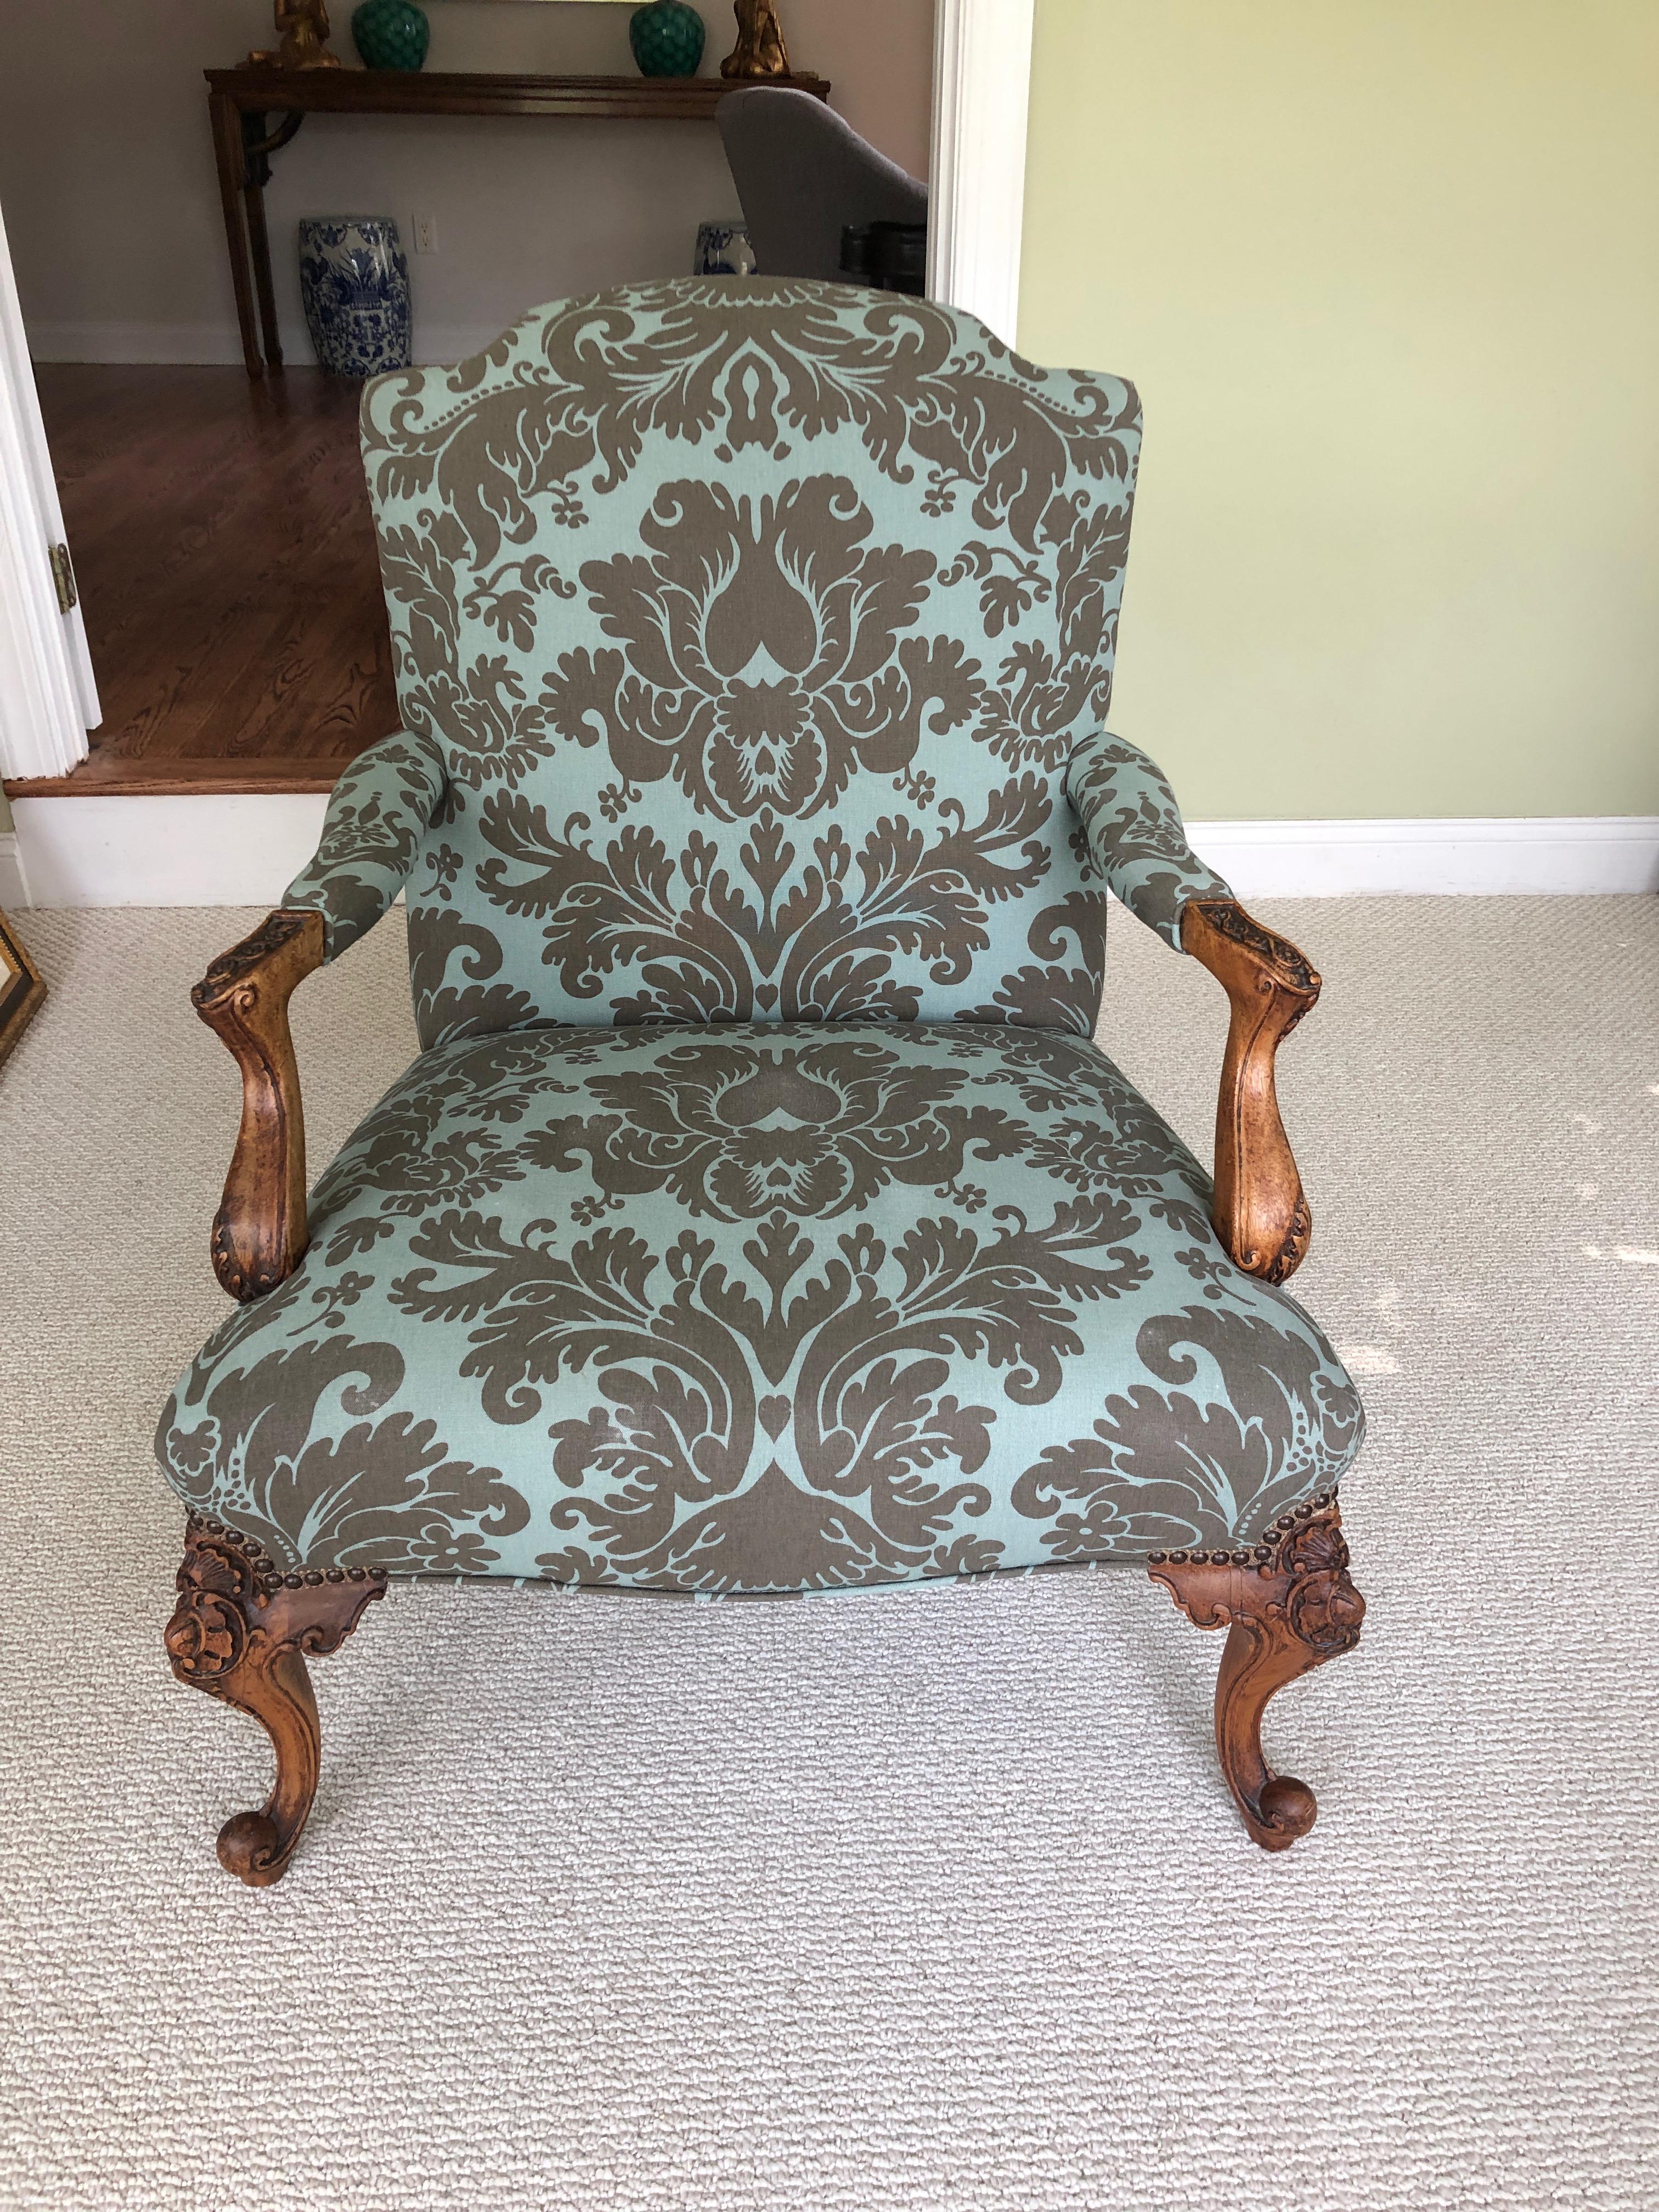 Classic French style Louis XVI carved light walnut armchair having grey and light blue patterned upholstery.
Measures: Arm height 24, seat depth 22.